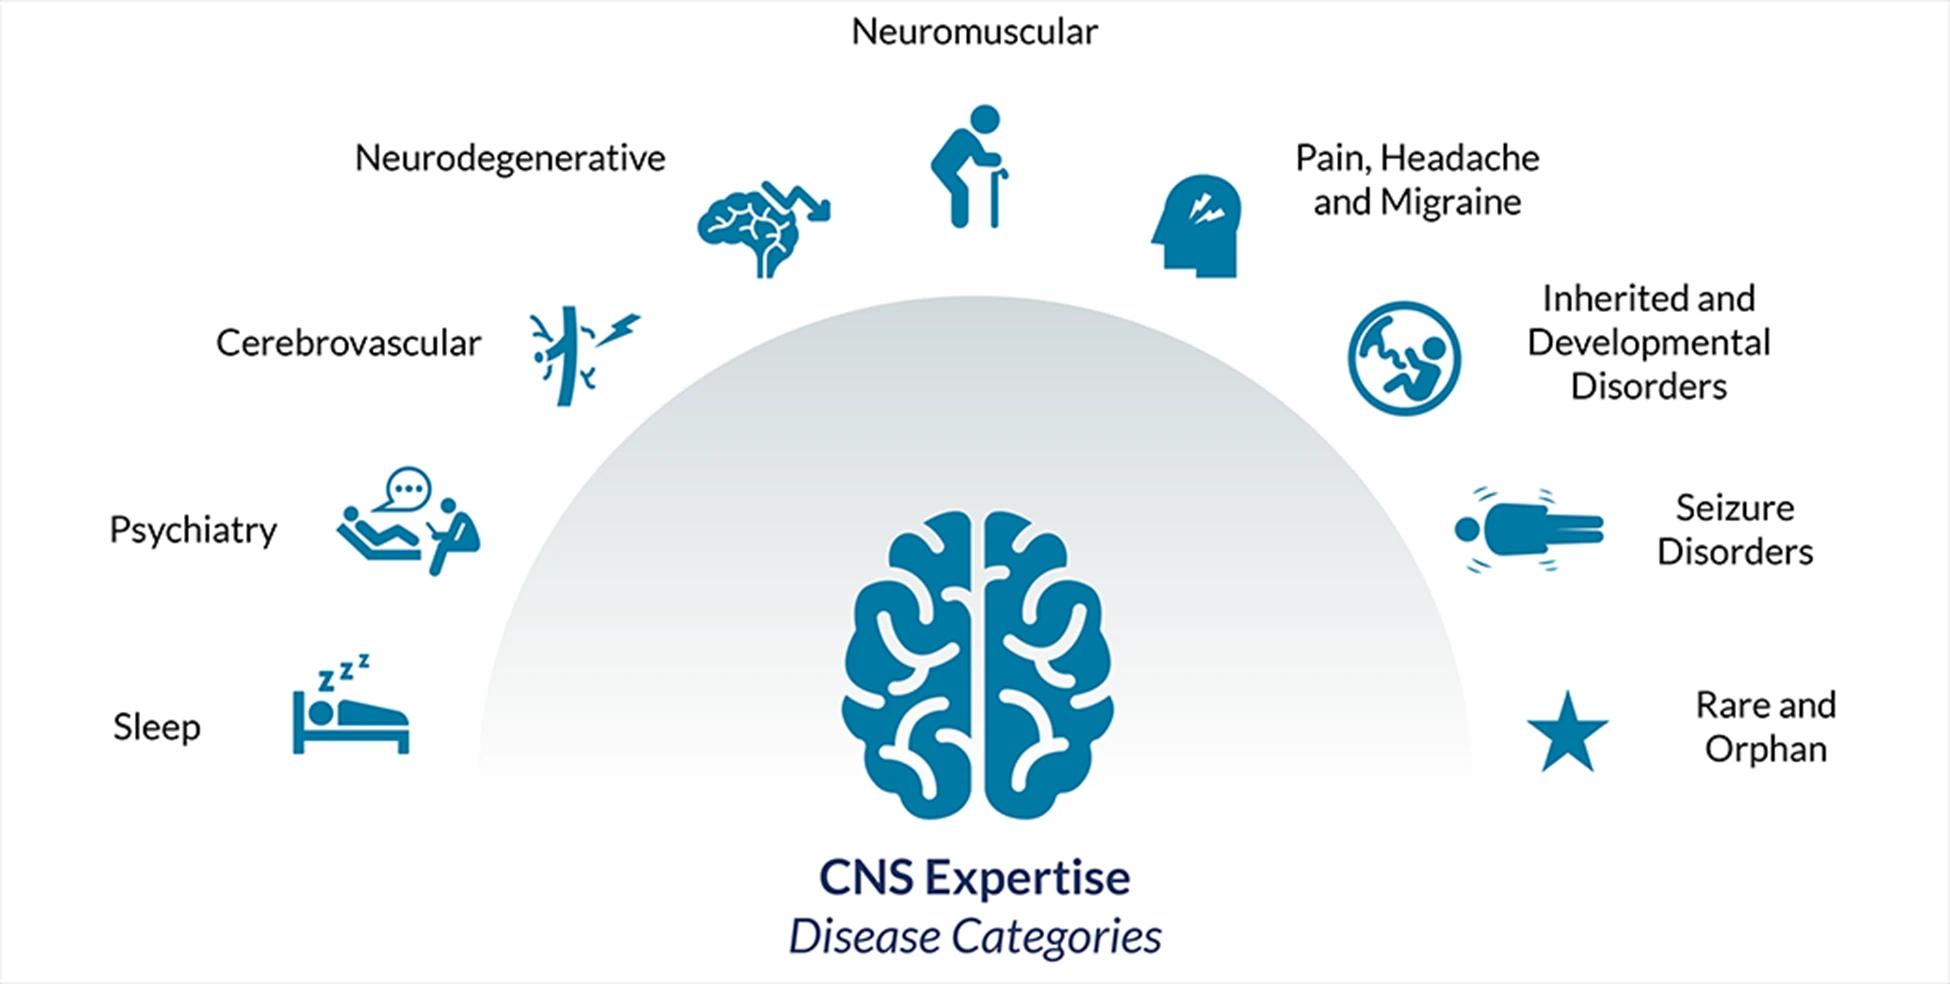 CNS Expertise